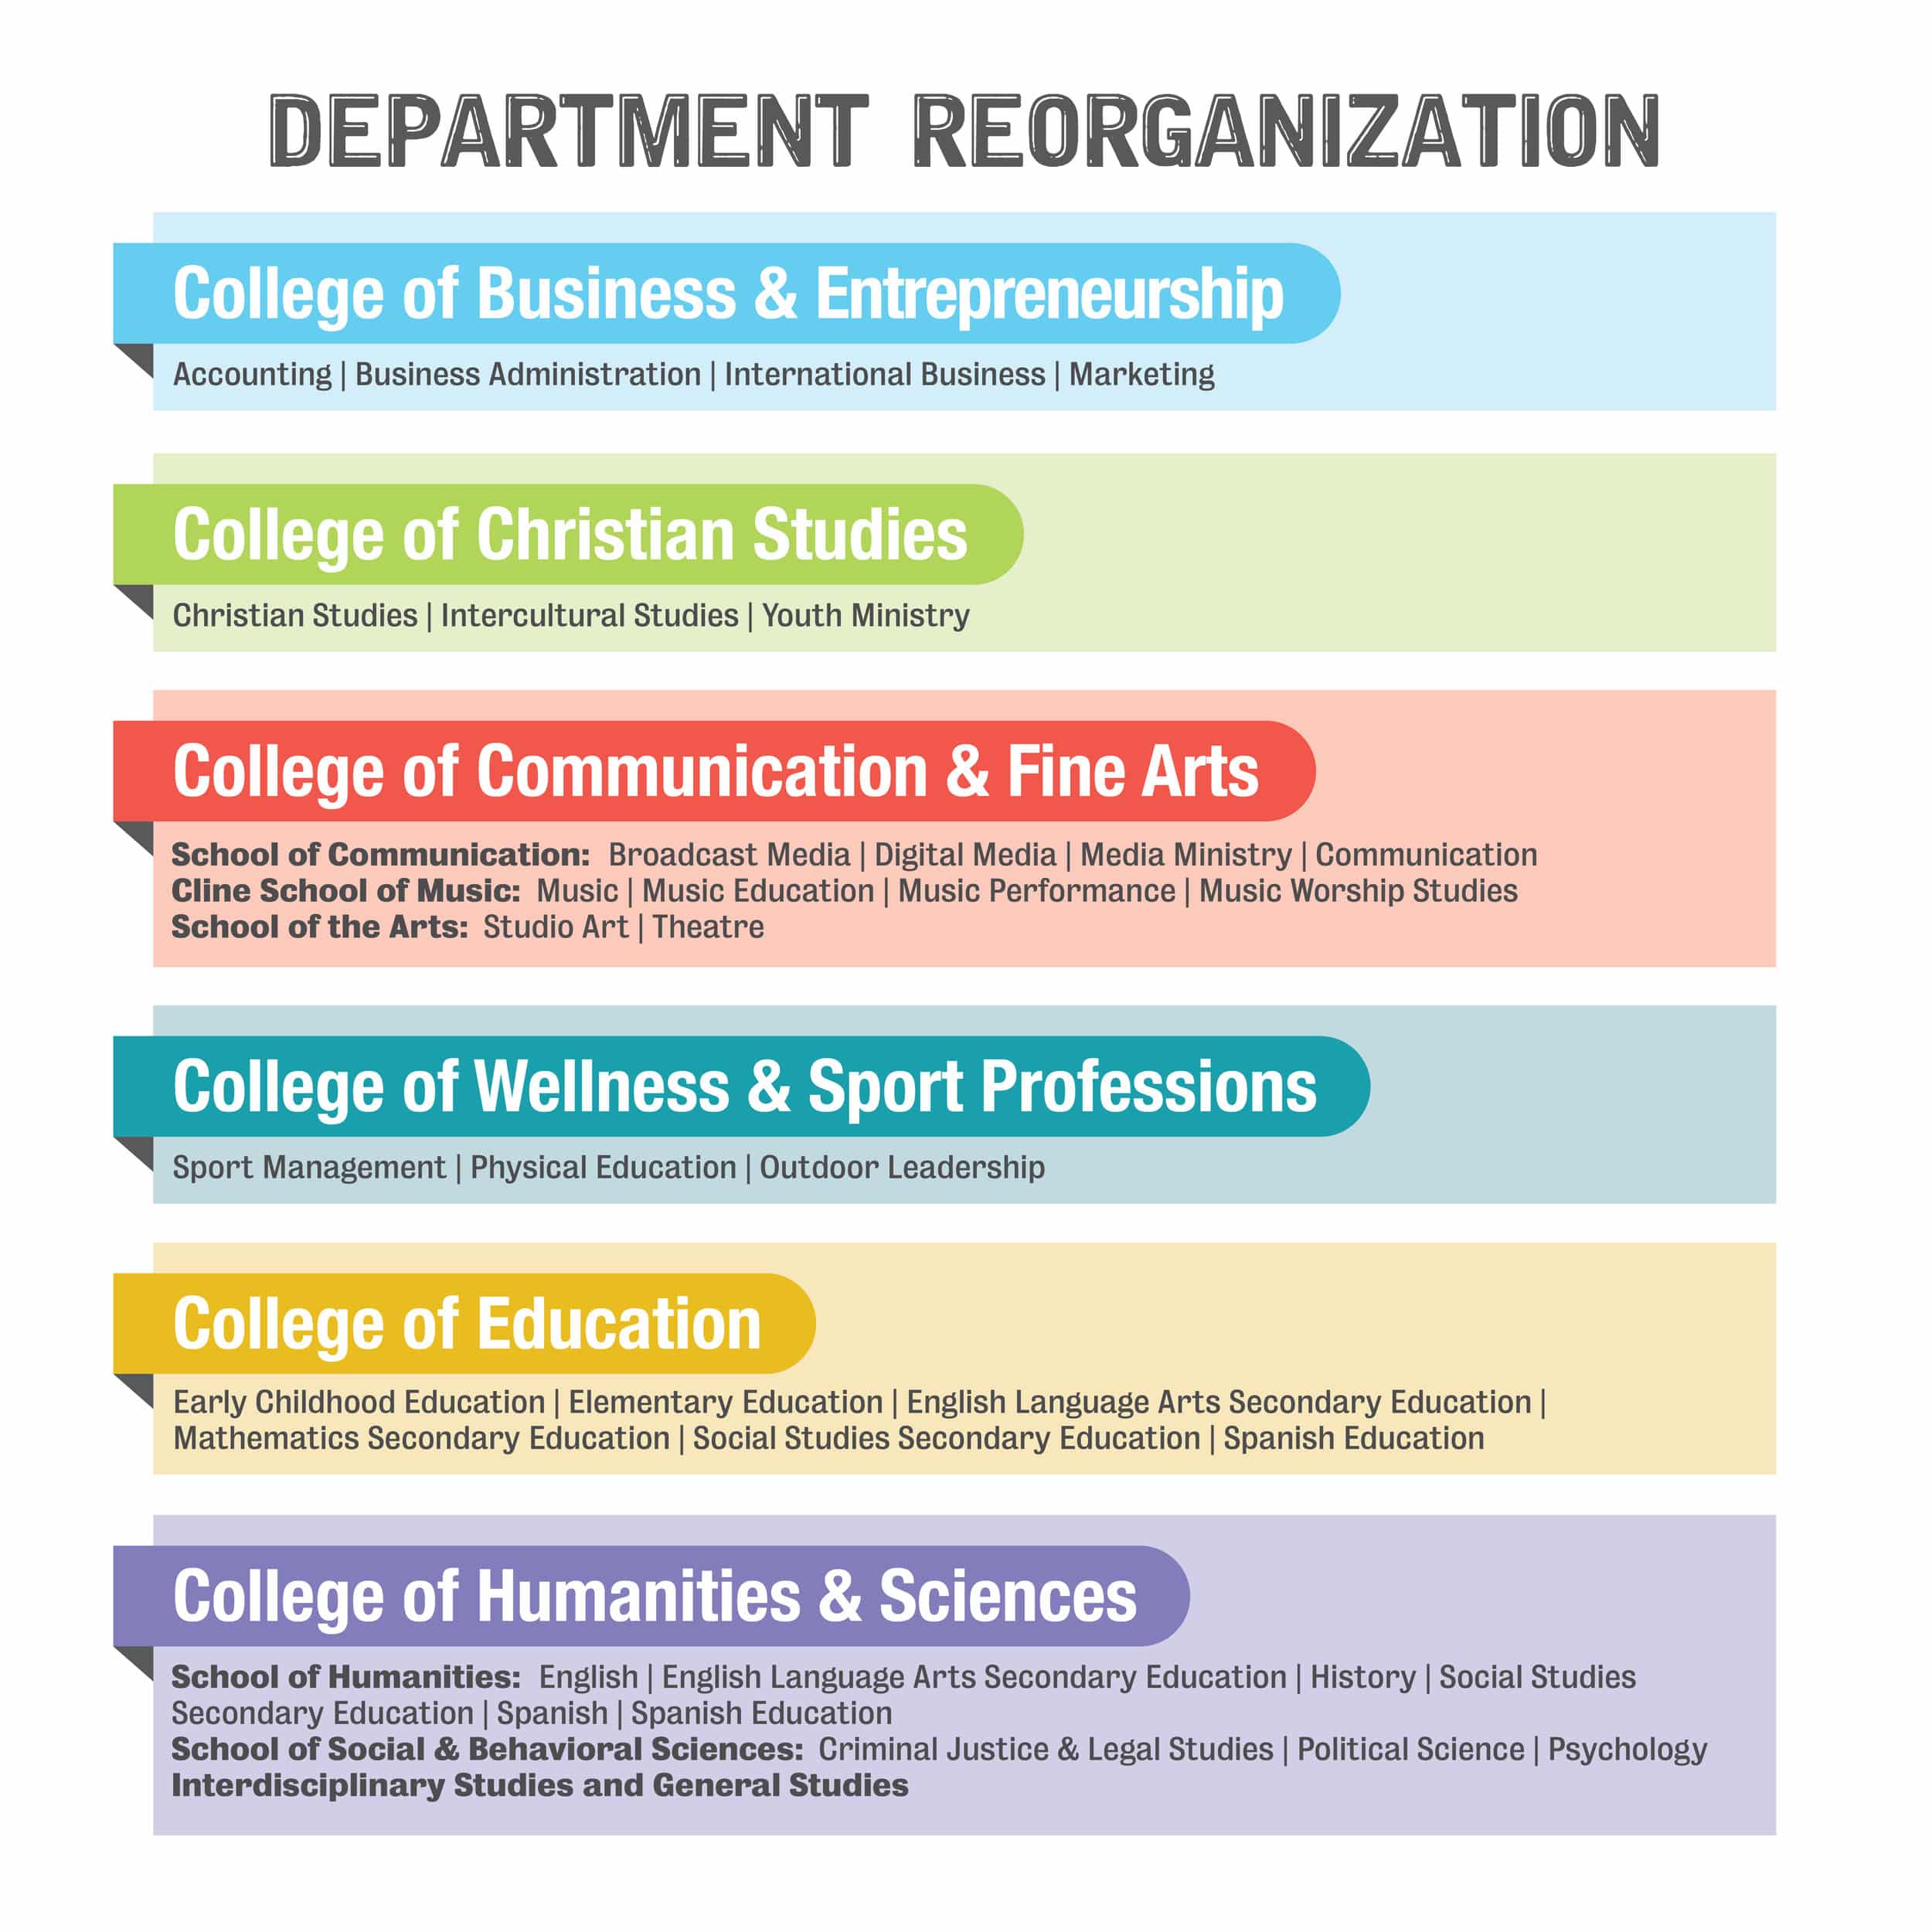 North Greenville University has reorganized their educational departments this year. Here are the changes with the corresponding majors in each department.